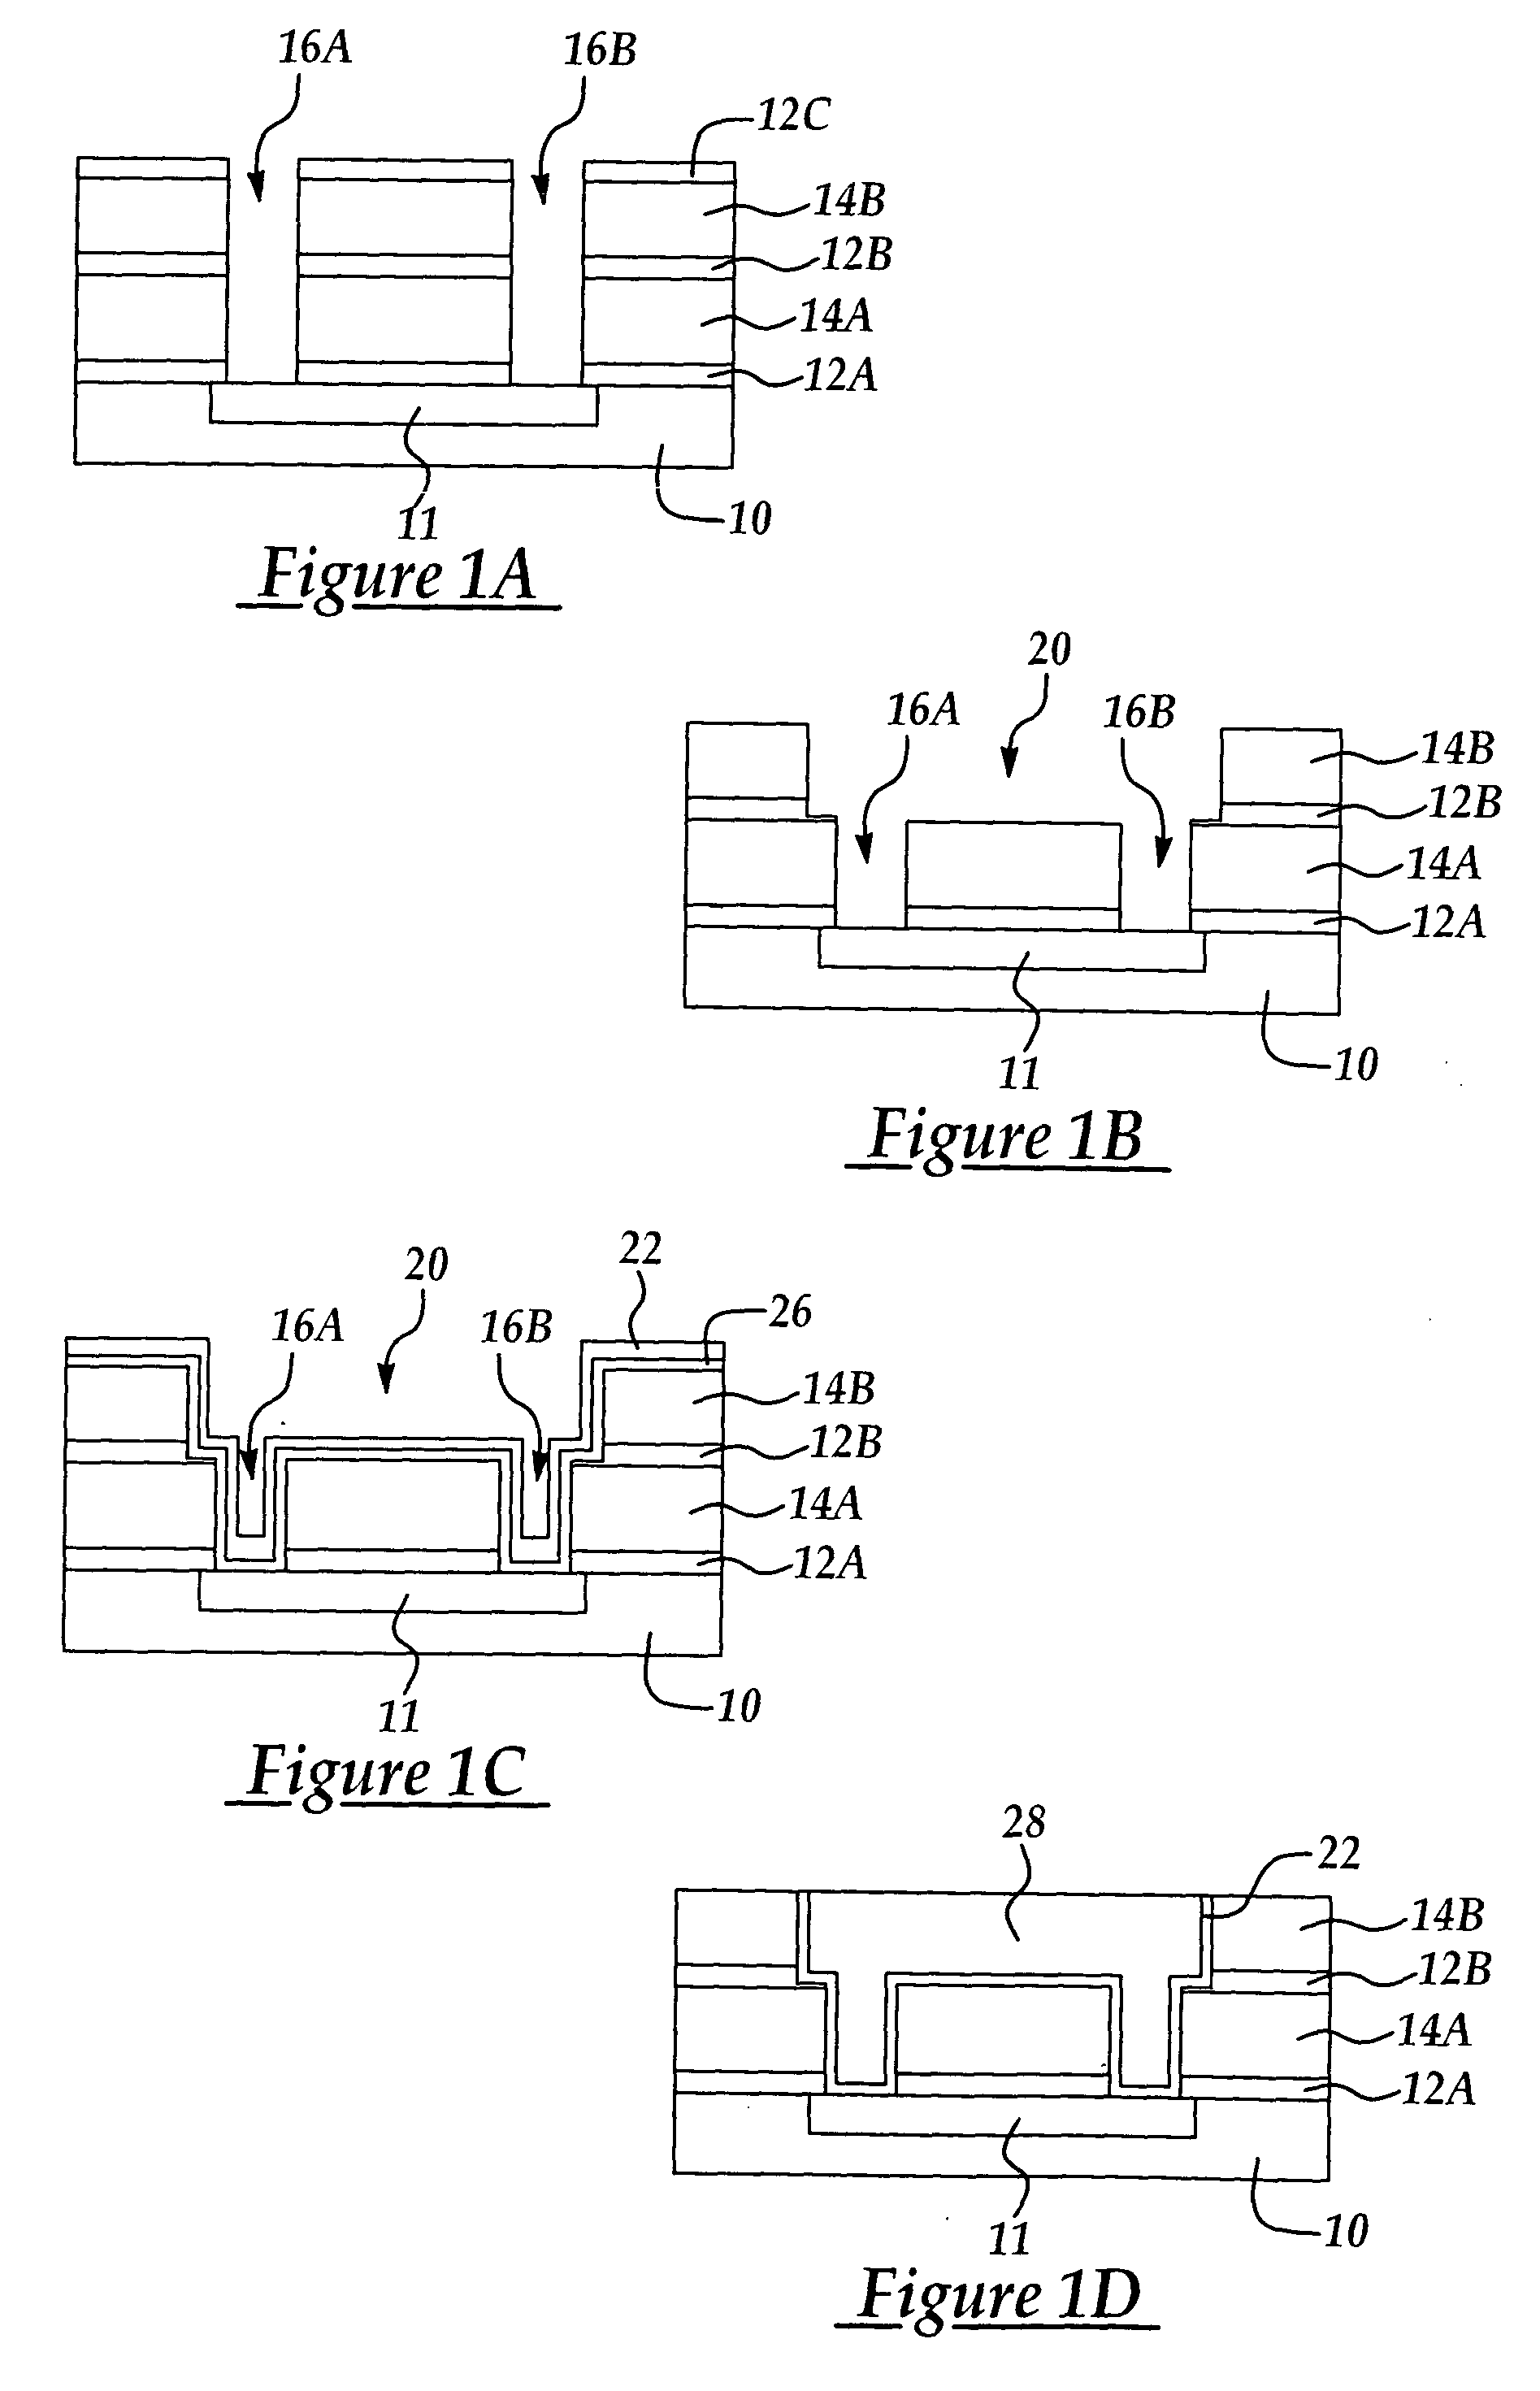 Method for simultaneous degas and baking in copper damascene process